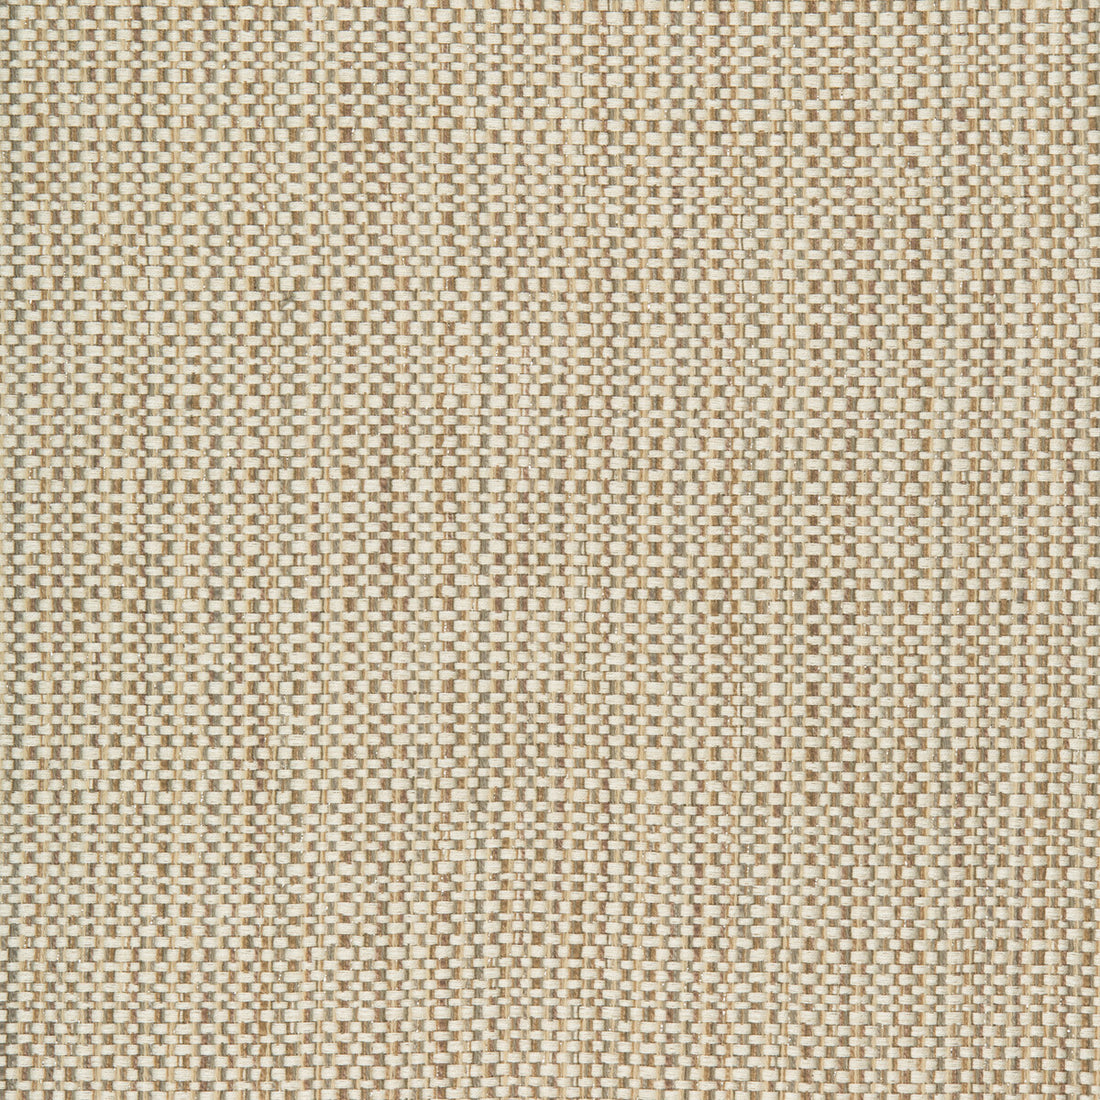 Kravet Design fabric in 34683-611 color - pattern 34683.611.0 - by Kravet Design in the Performance Crypton Home collection